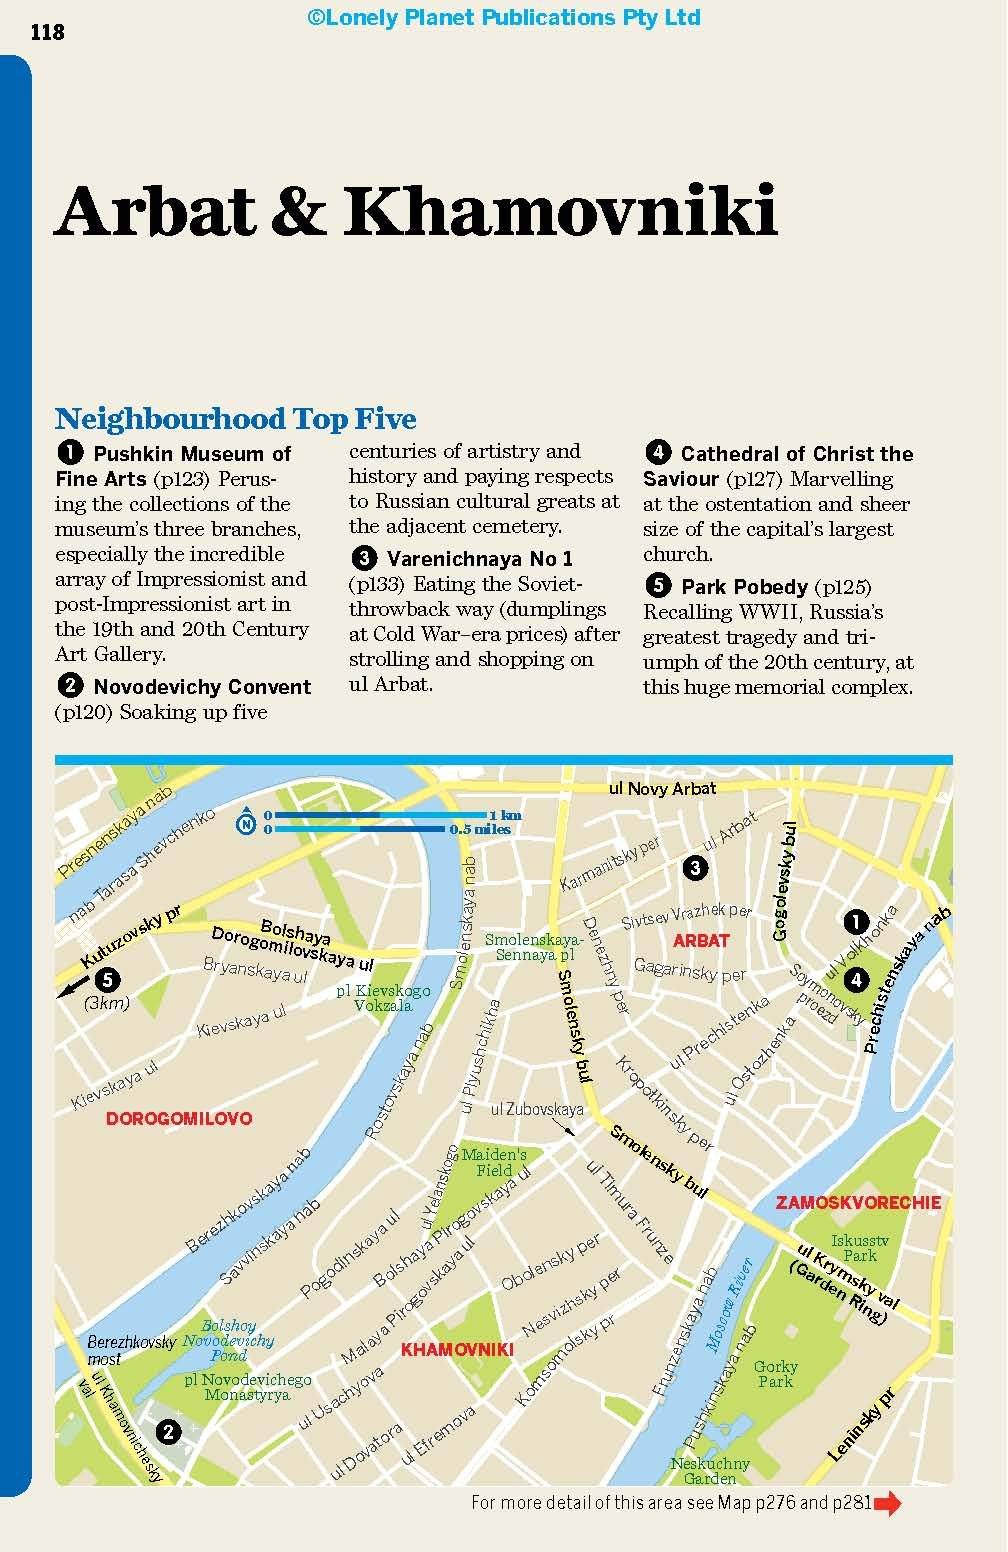 Guide de voyage (en anglais) - Moscow | Lonely Planet guide de voyage Lonely Planet 